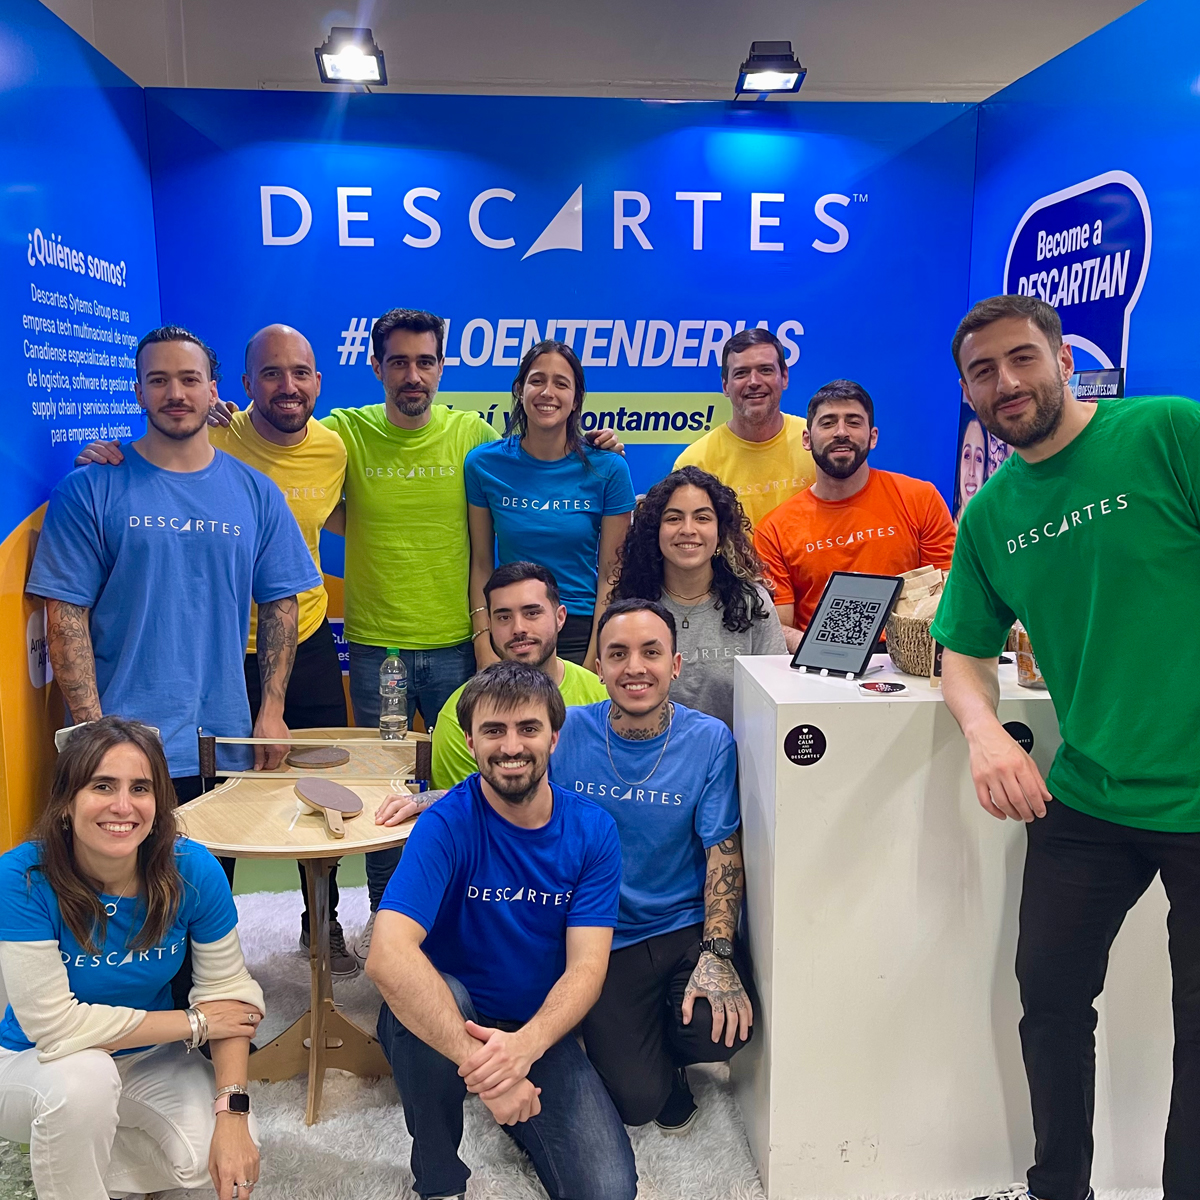 Team members from Descartes' R & D team at a recruiting event